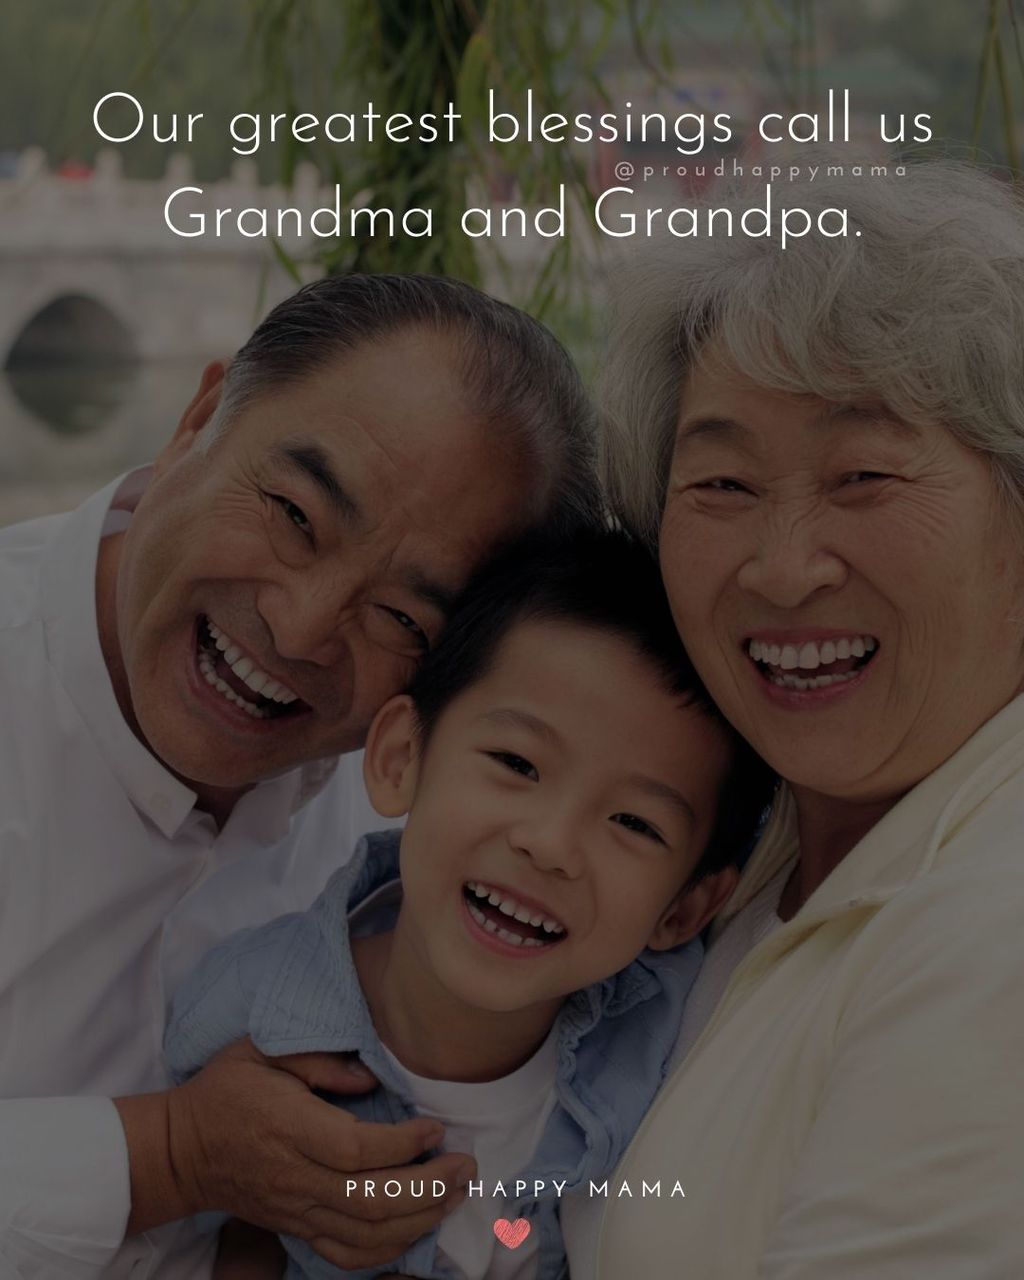 Quotes for Grandchildren - Our greatest blessings call us Grandma and Grandpa.